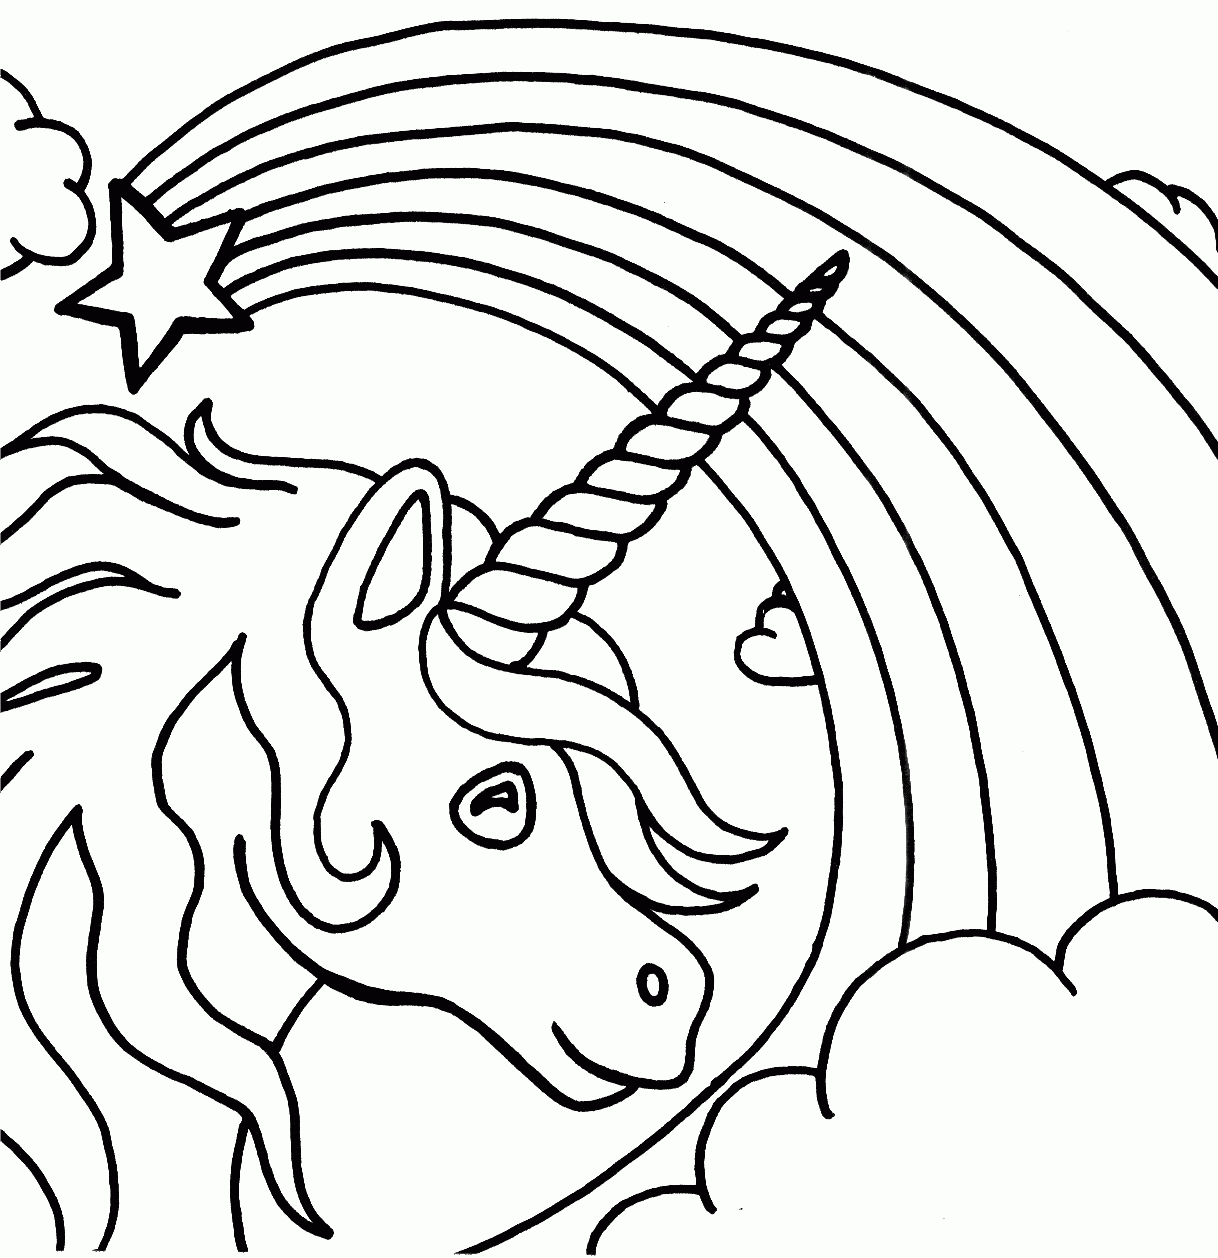 Free Unicorn Coloring Pages Online, Download Free Unicorn Coloring ...